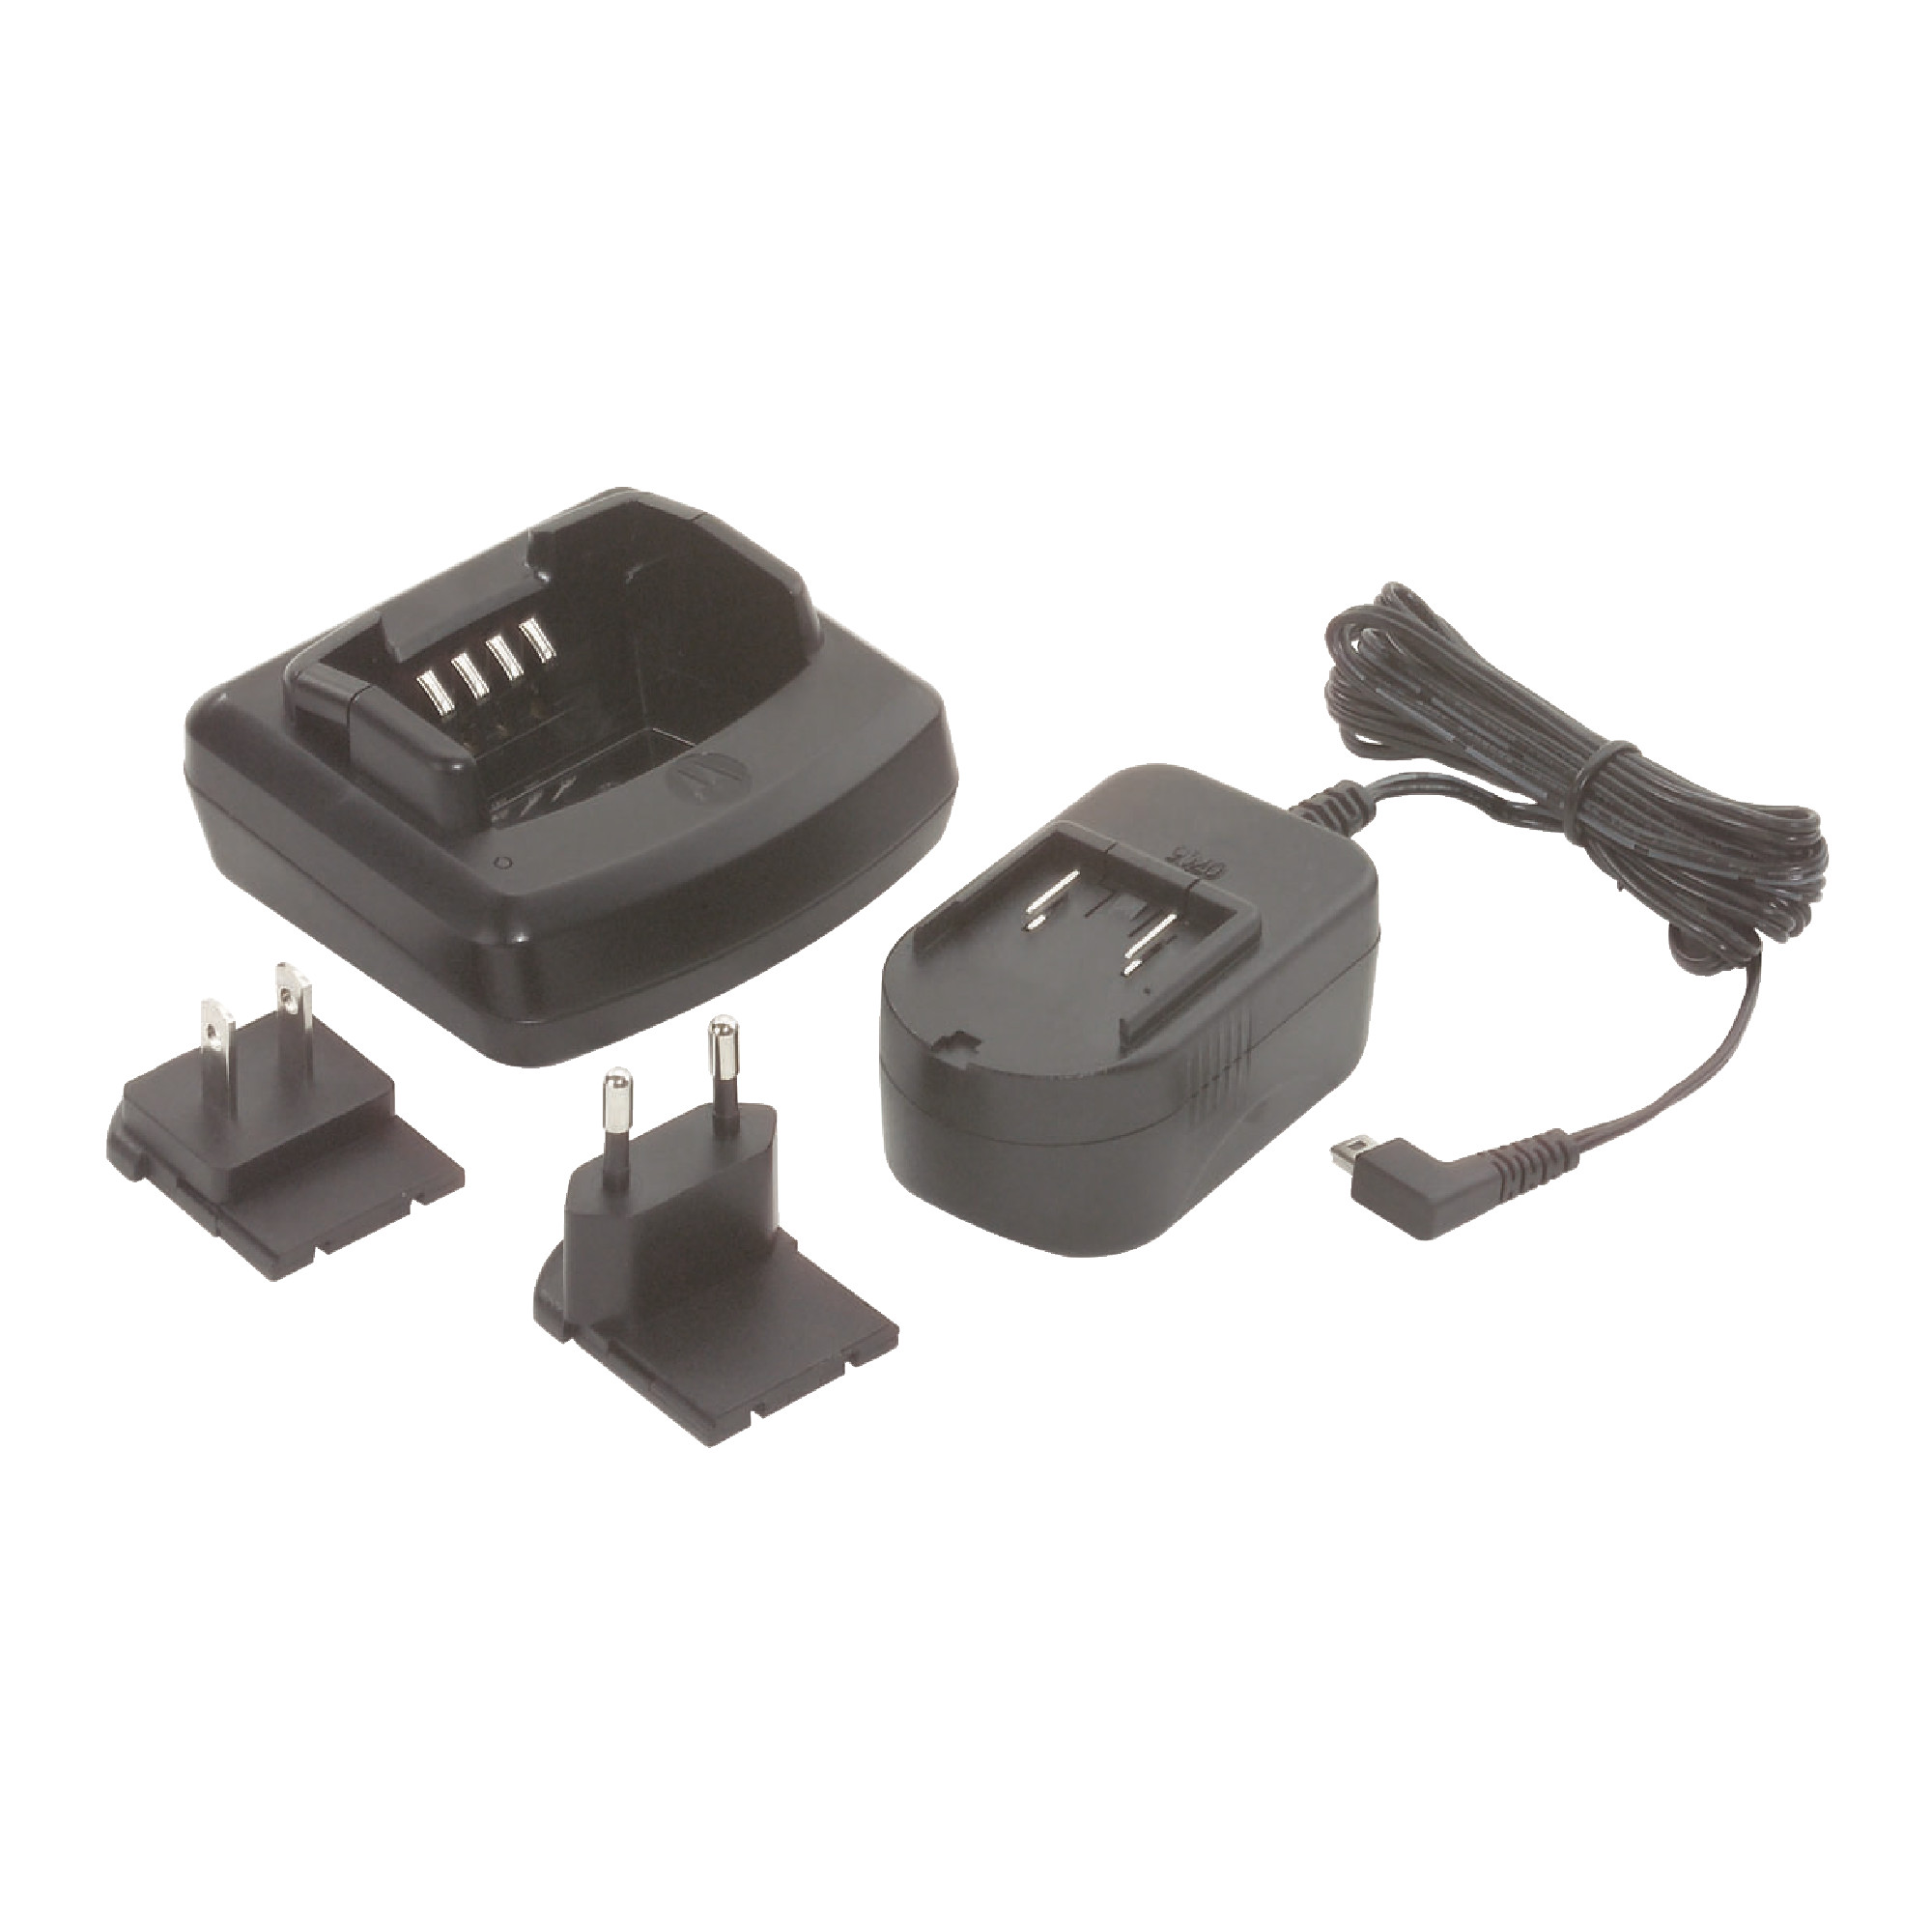 2-Hour Rapid Charger Kit